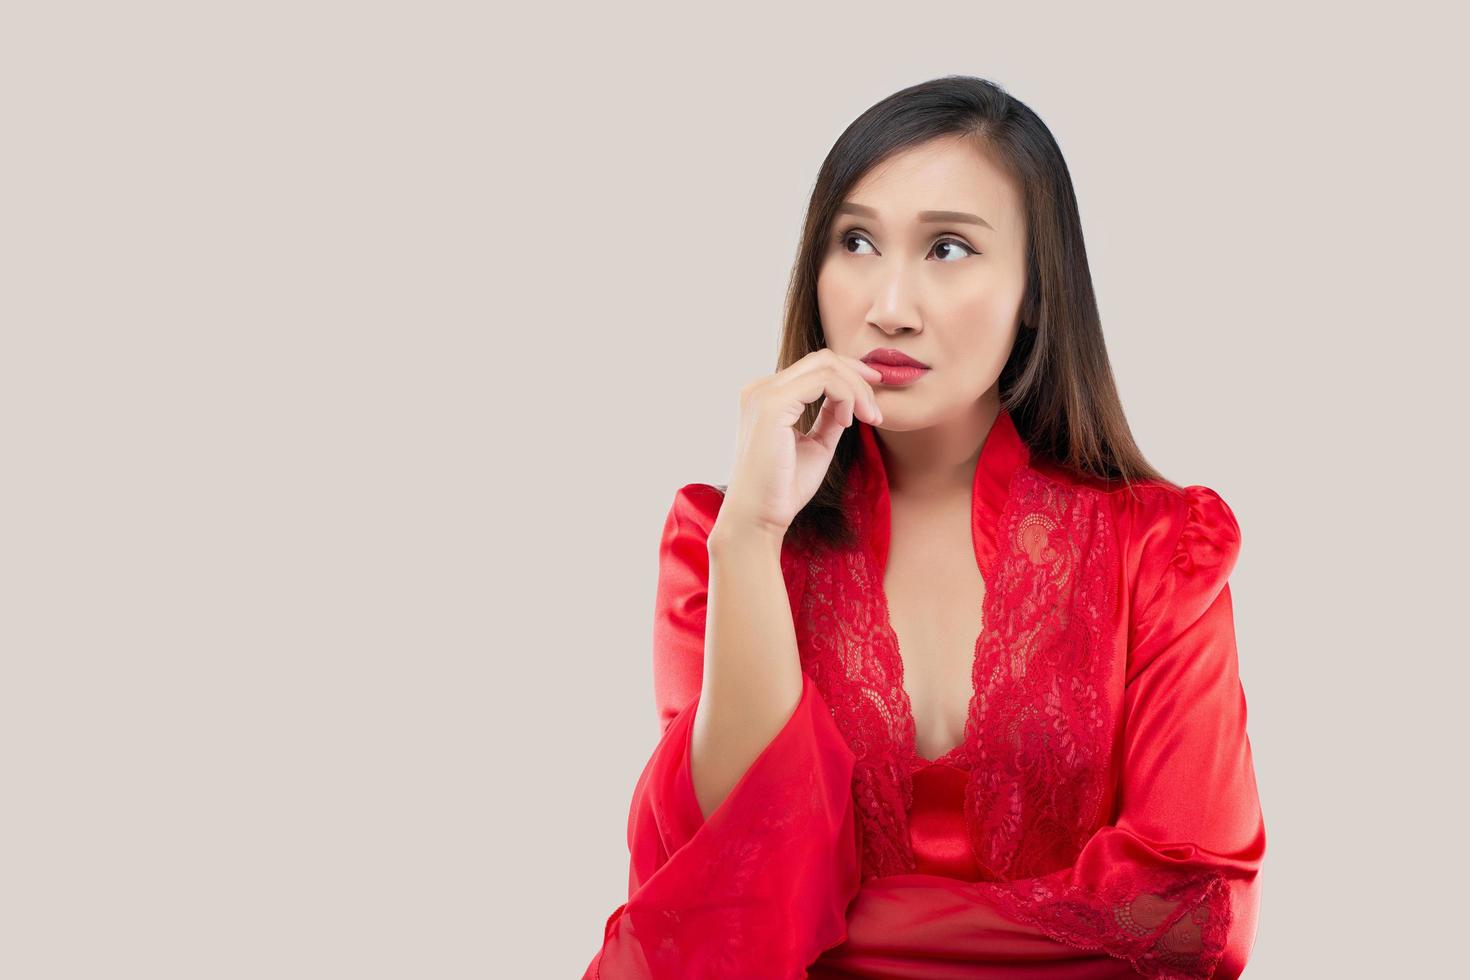 Asian woman in a red satin nightwear thinking photo